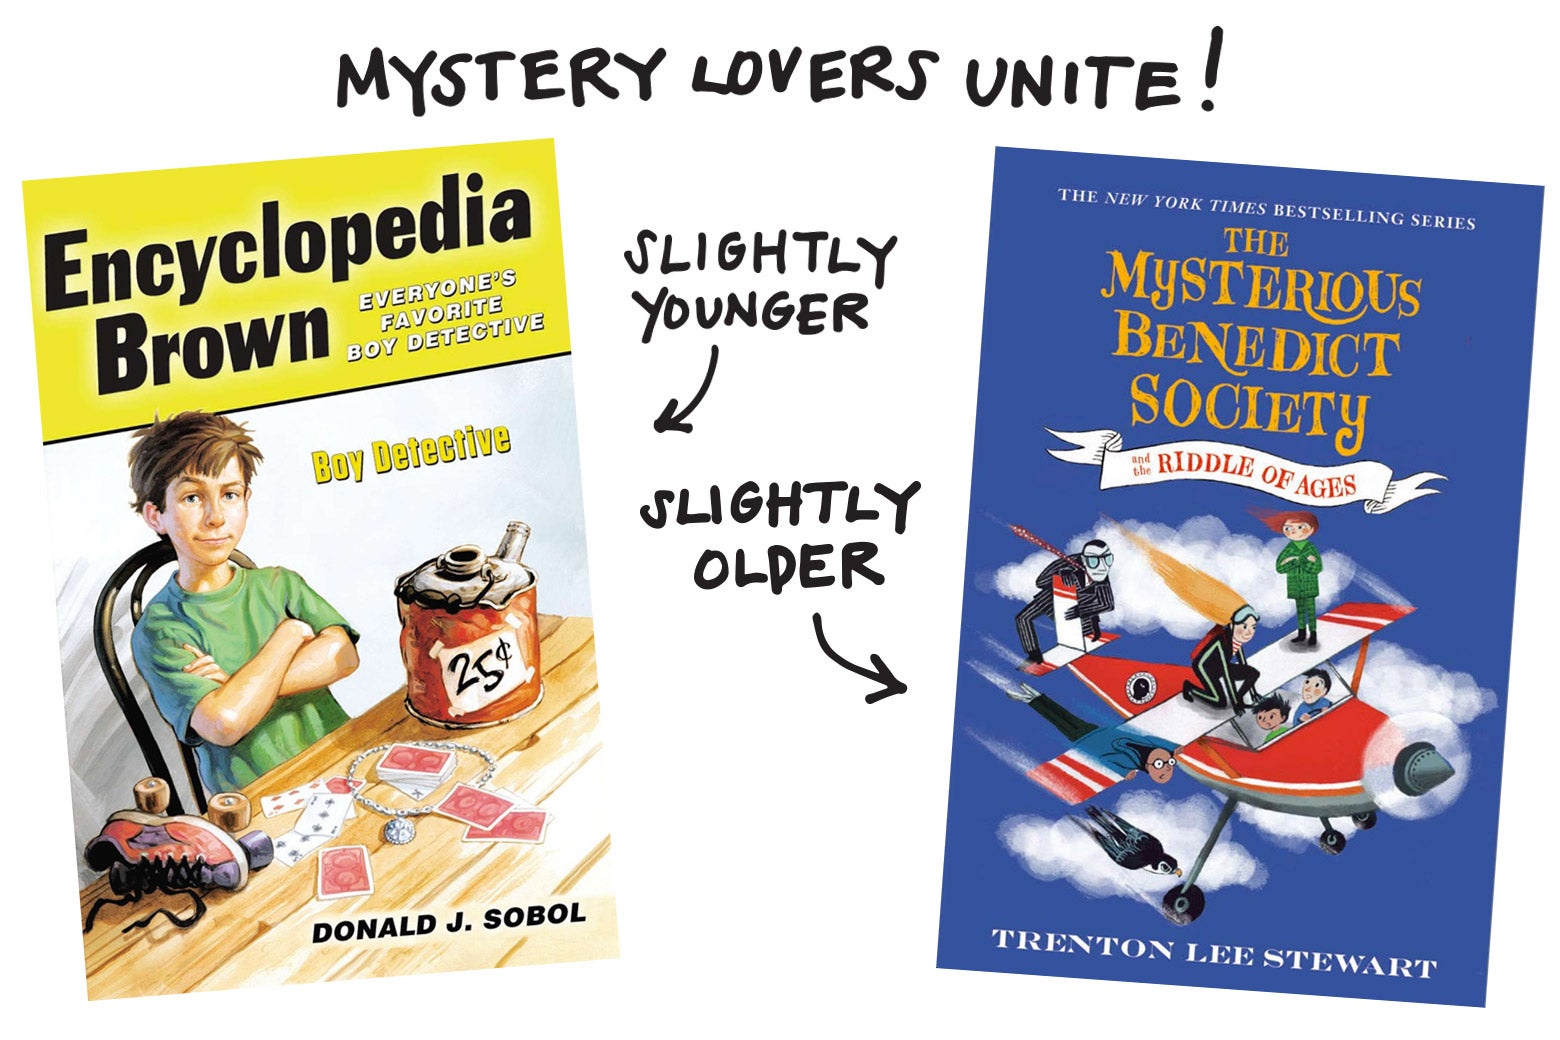 Mystery lovers unite! Encyclopedia Brown for younger readers, and The Mysterious Benedict Society for slightly older readers.